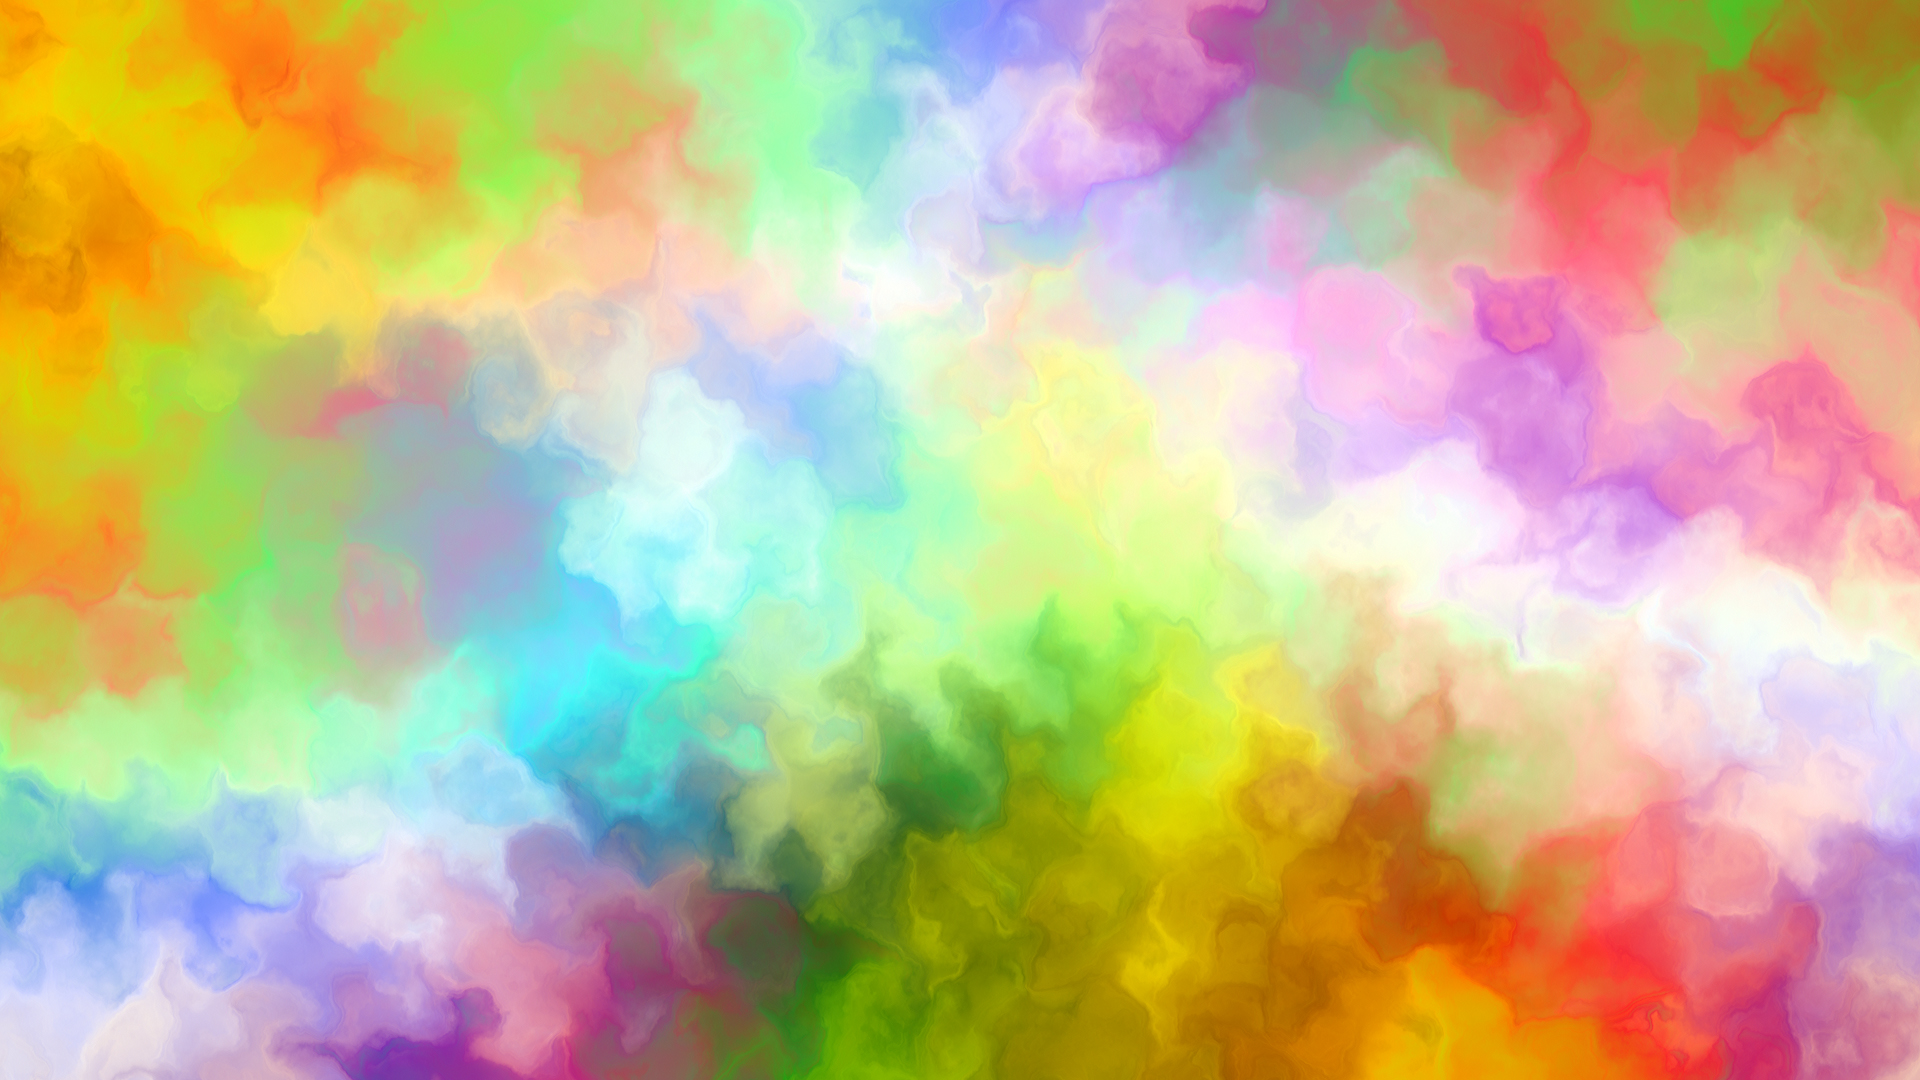 Abstract Color Background Hd - 1920x1080 Wallpaper 